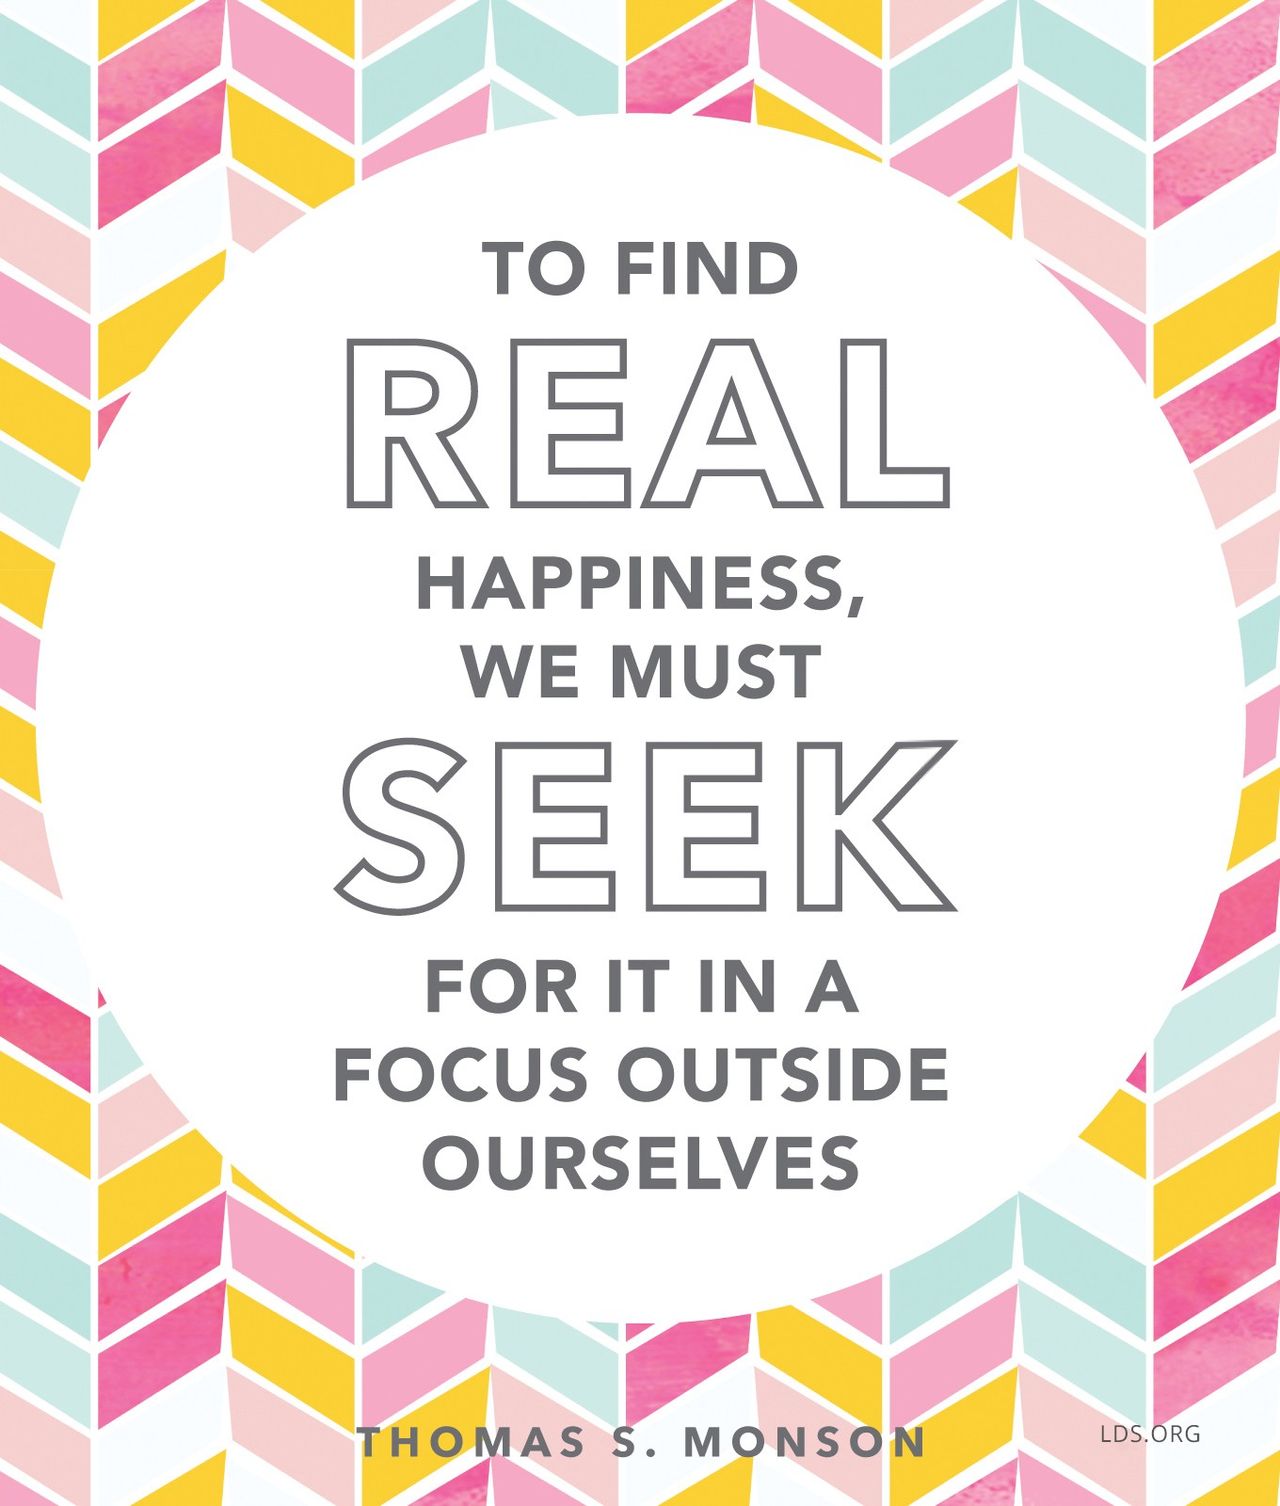 “To find real happiness, we must seek for it in a focus outside ourselves.”—President Thomas S. Monson, “The Joy of Service”